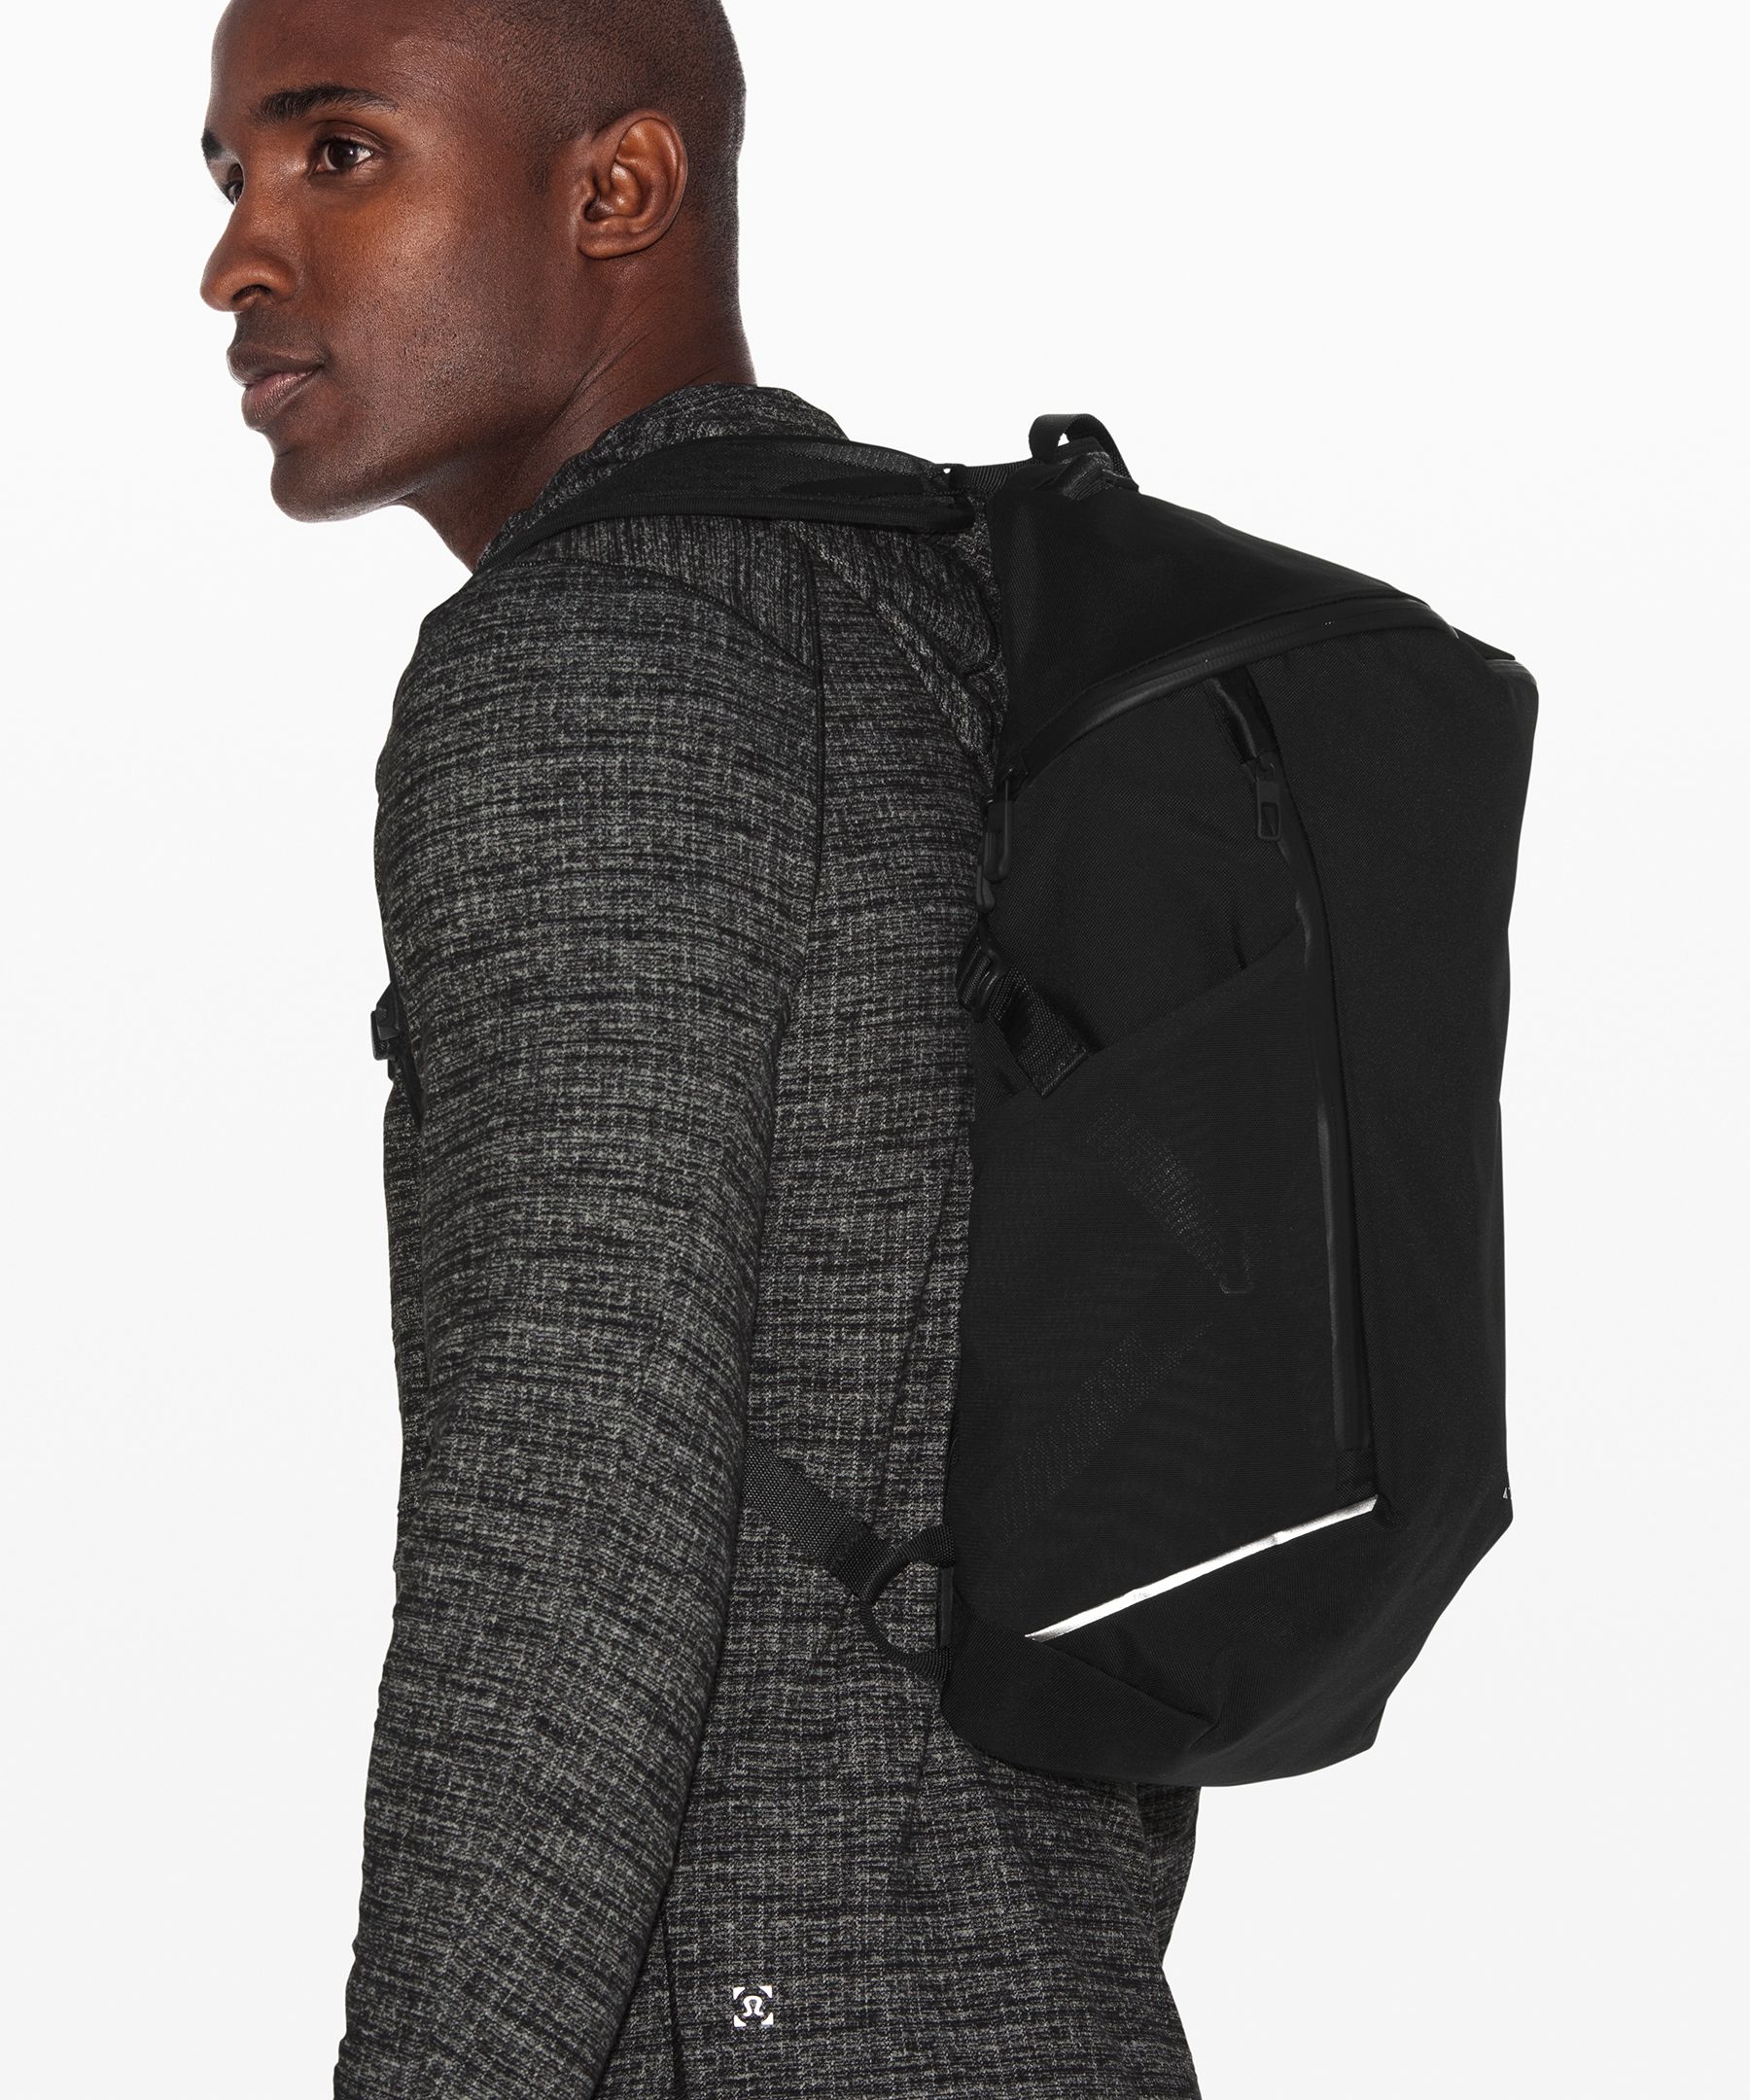 lululemon more miles backpack review